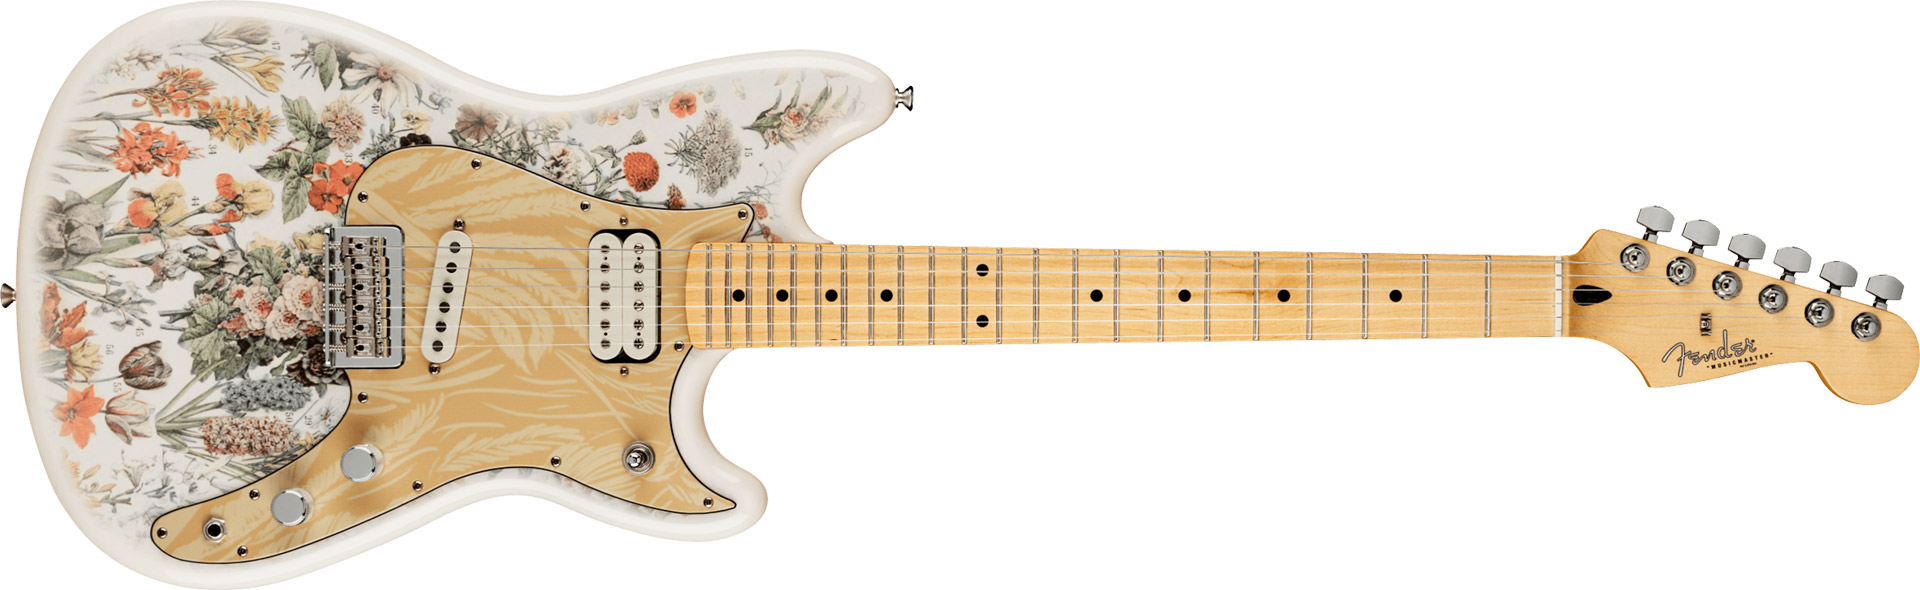 GUITARRA FENDER SIG SERIES SHAWN MENDES FUNDATION MUSICMASTER 014-0292-523 YELLOW FLORAL